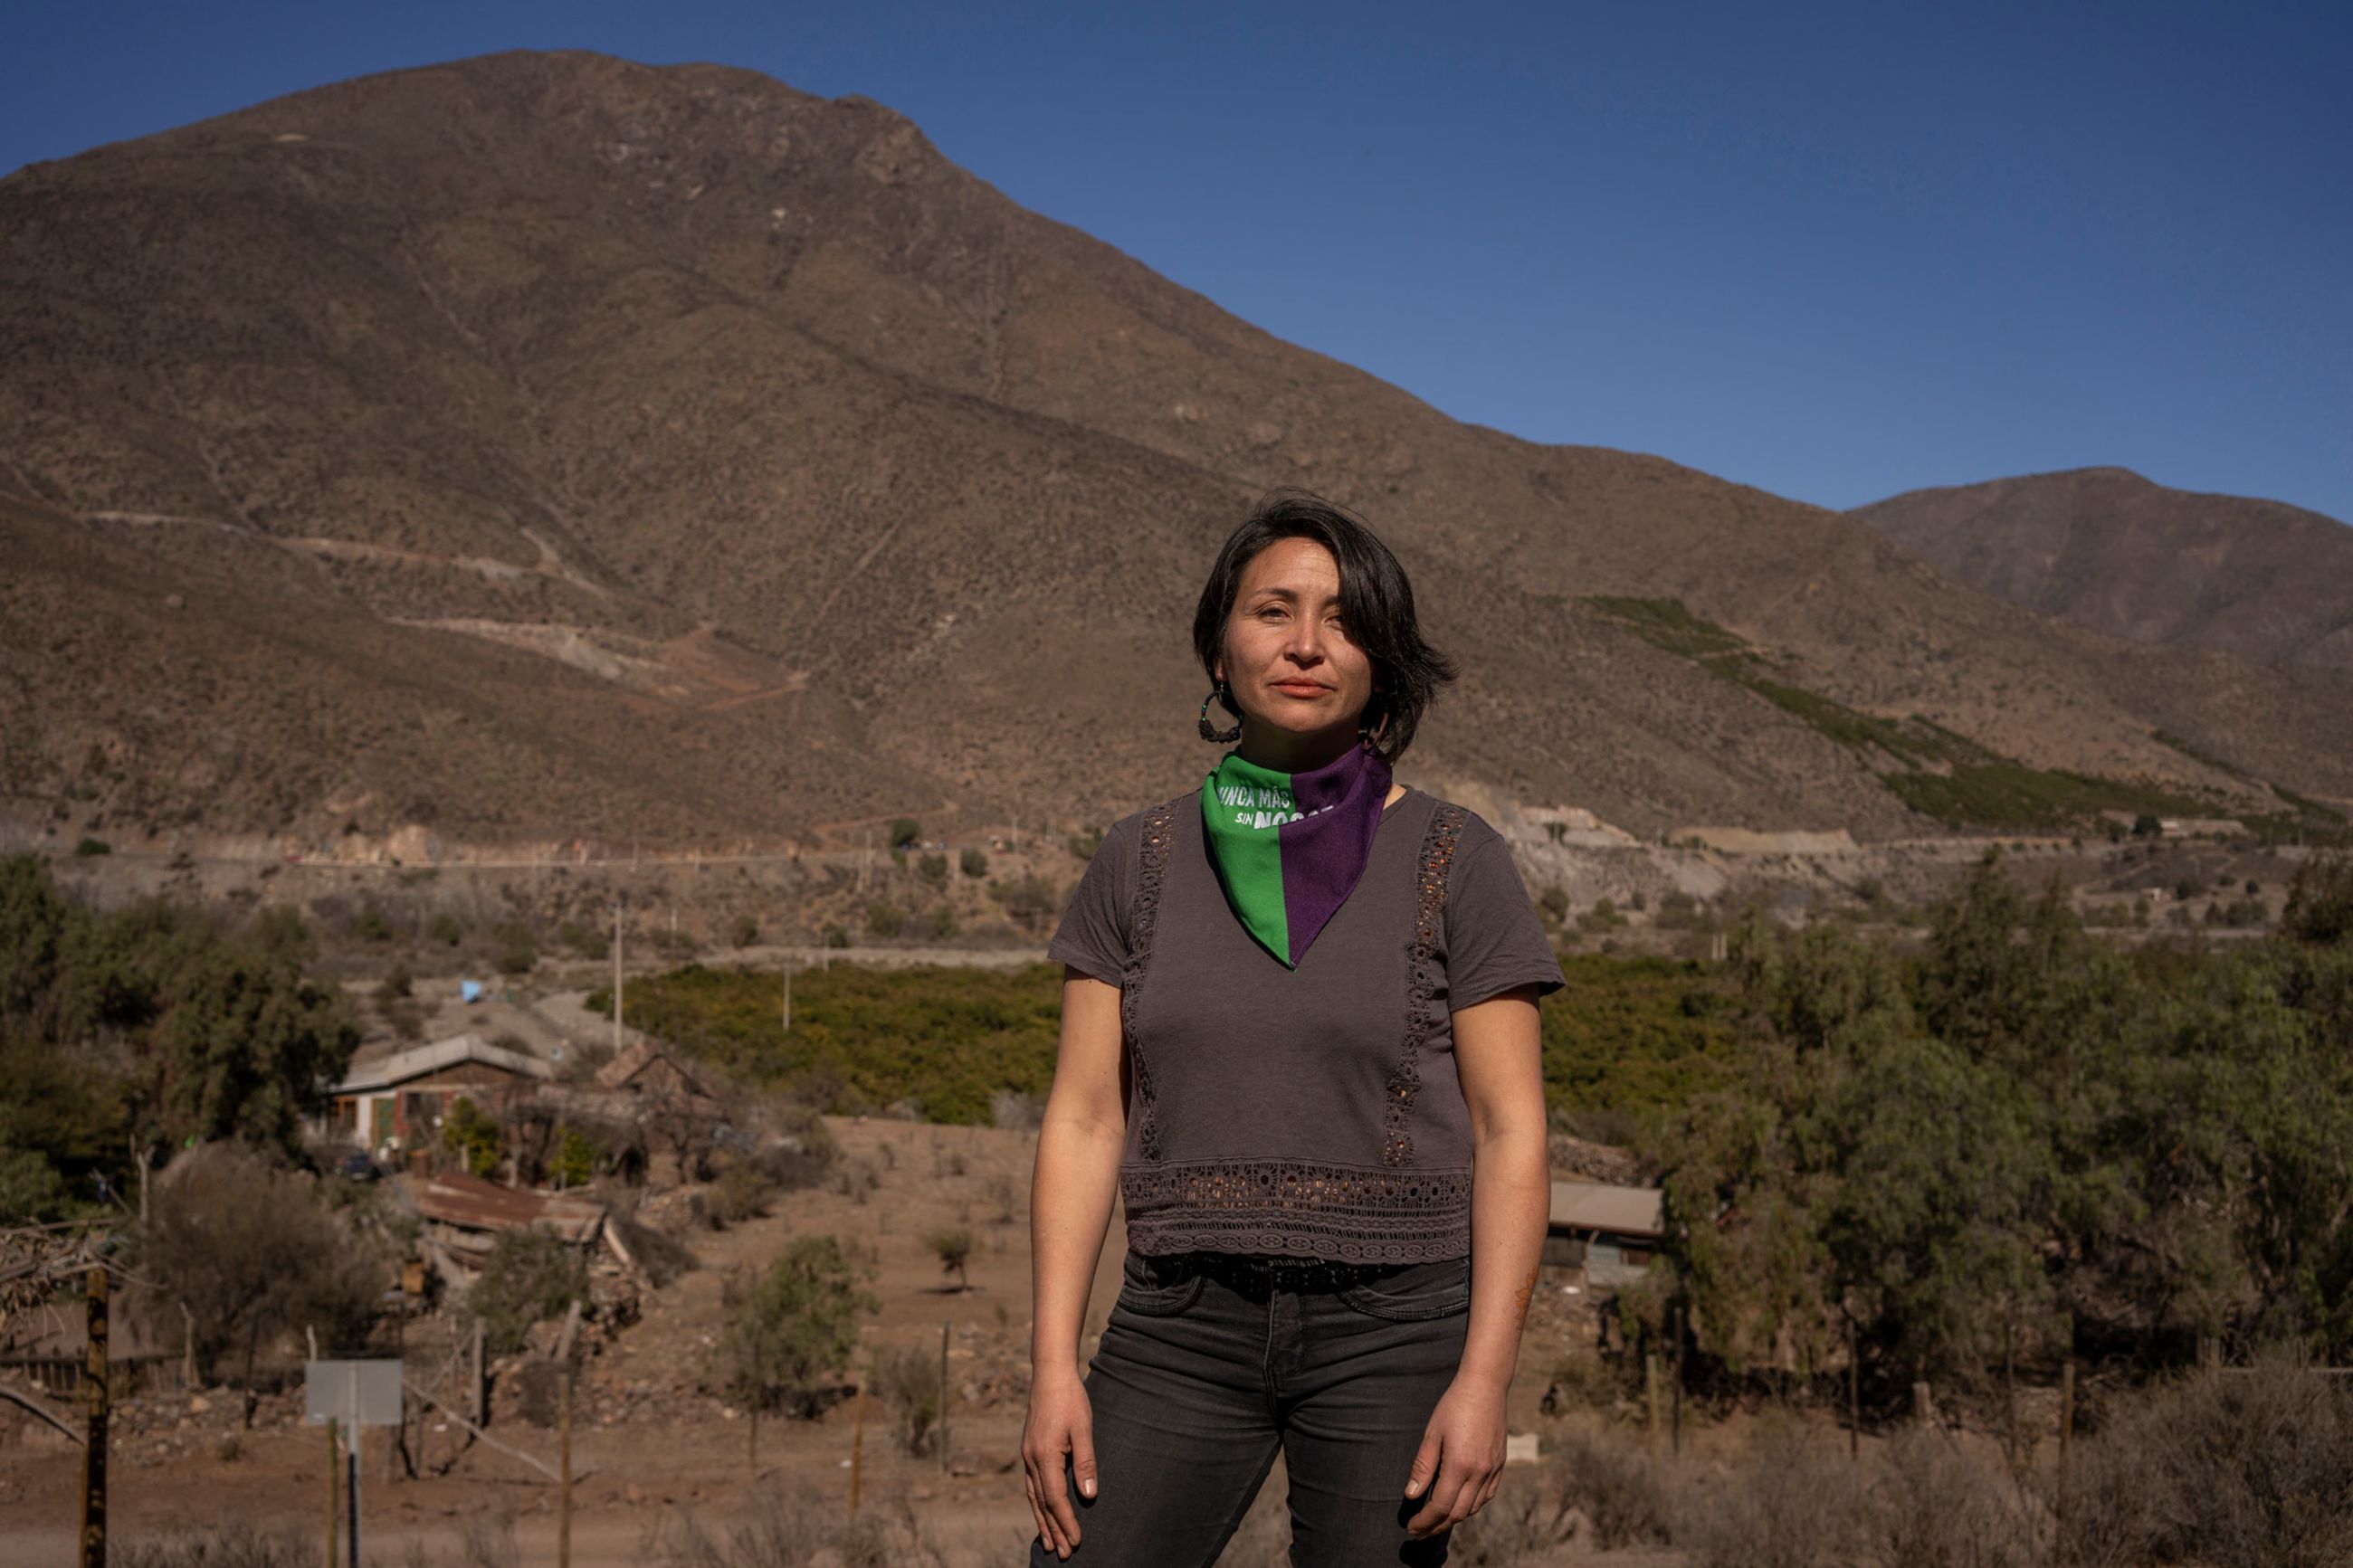 Meet Six People Fighting Water Scarcity Across the GlobeThe water crisis that experts have long warned about has arrived. A scientist, activist,...